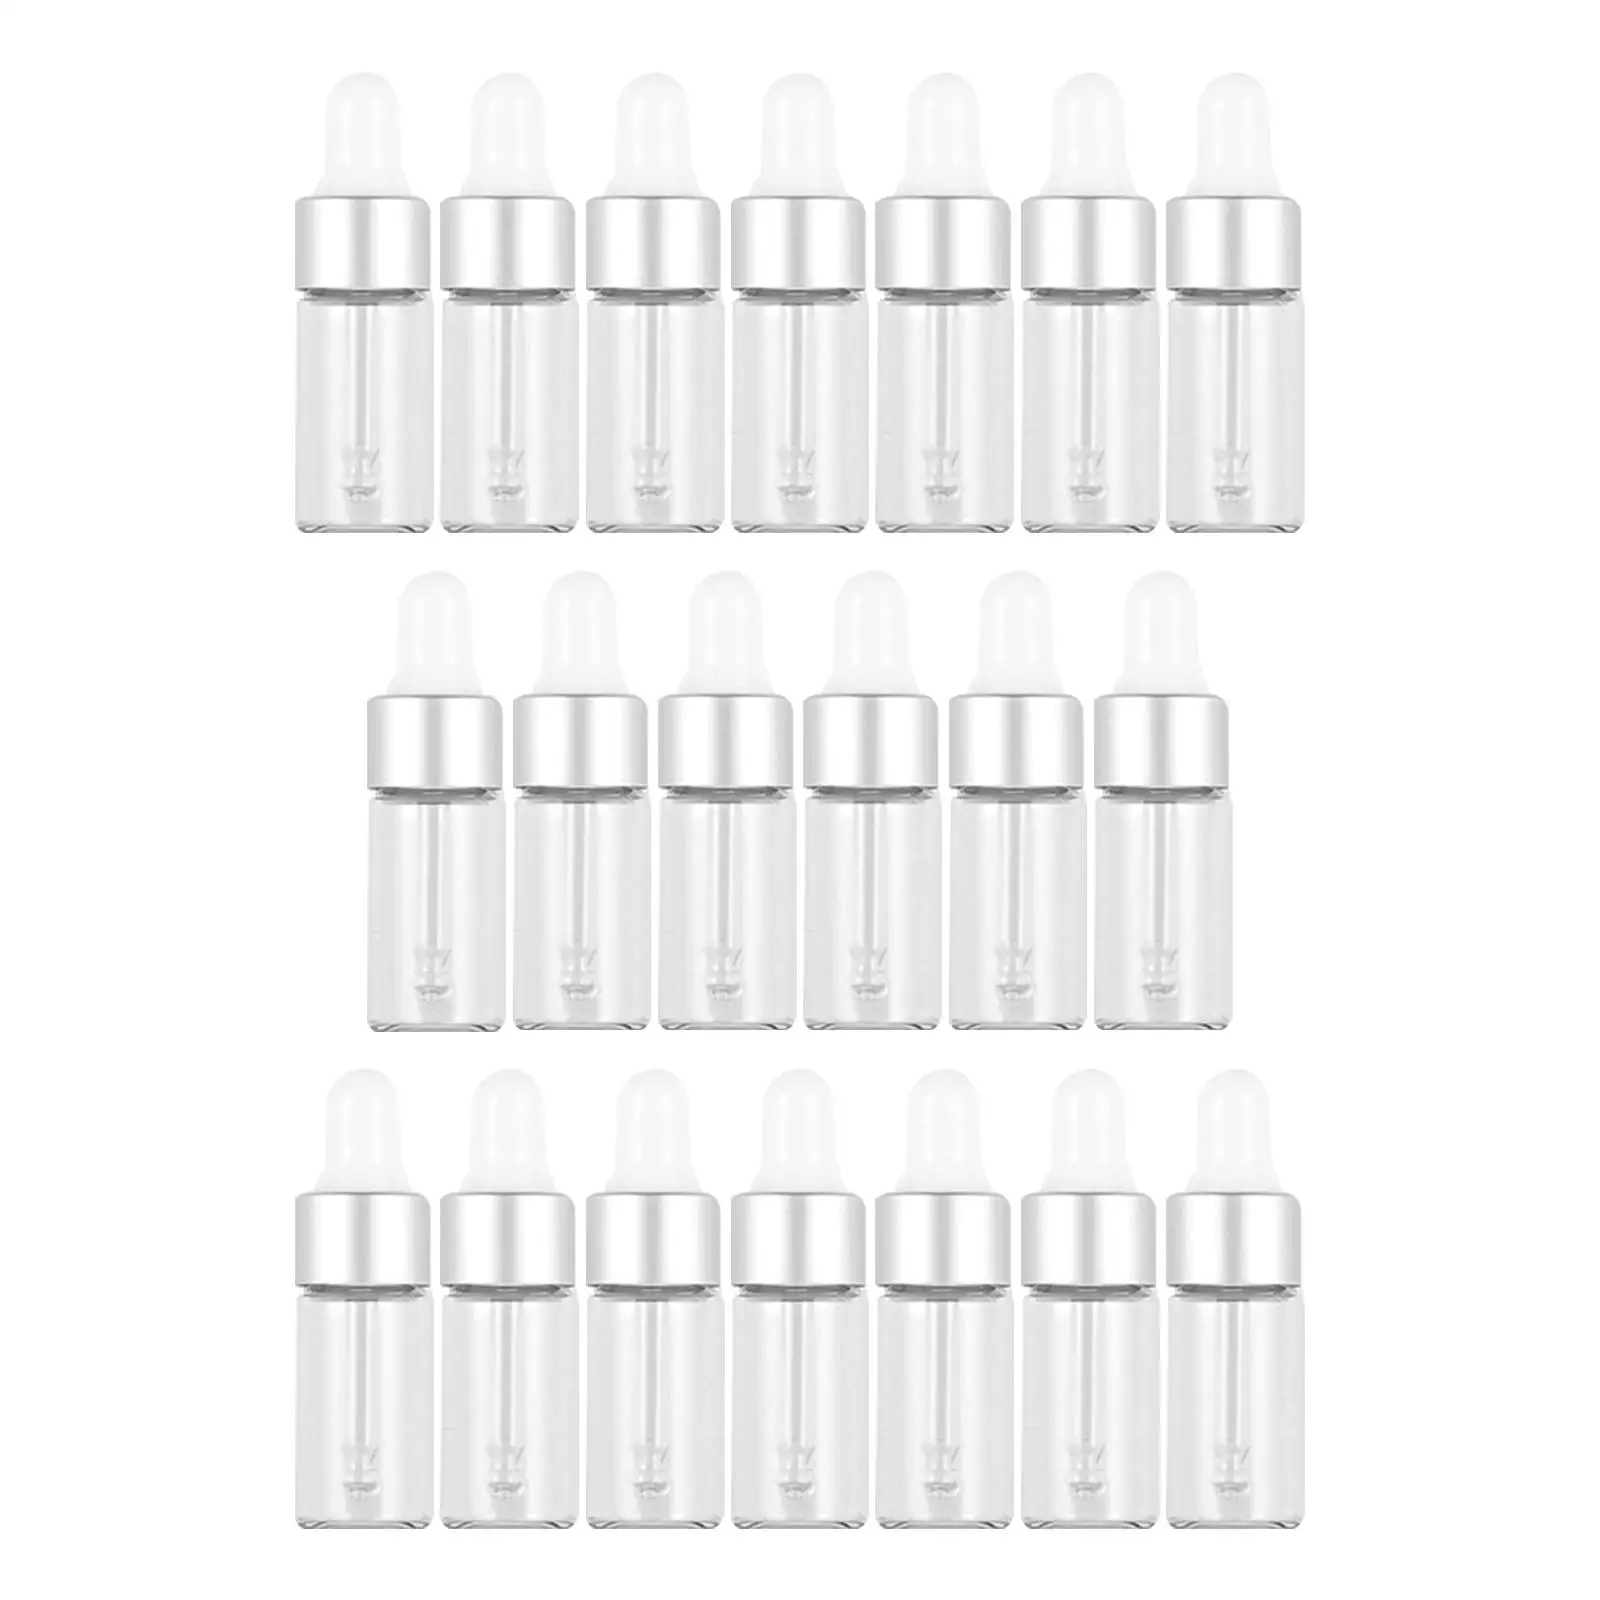 20x glass Dropper Bottles with Eye Droppers Empty Dispenser Containers for Liquids Hair Oil Perfume Oils Body Oils